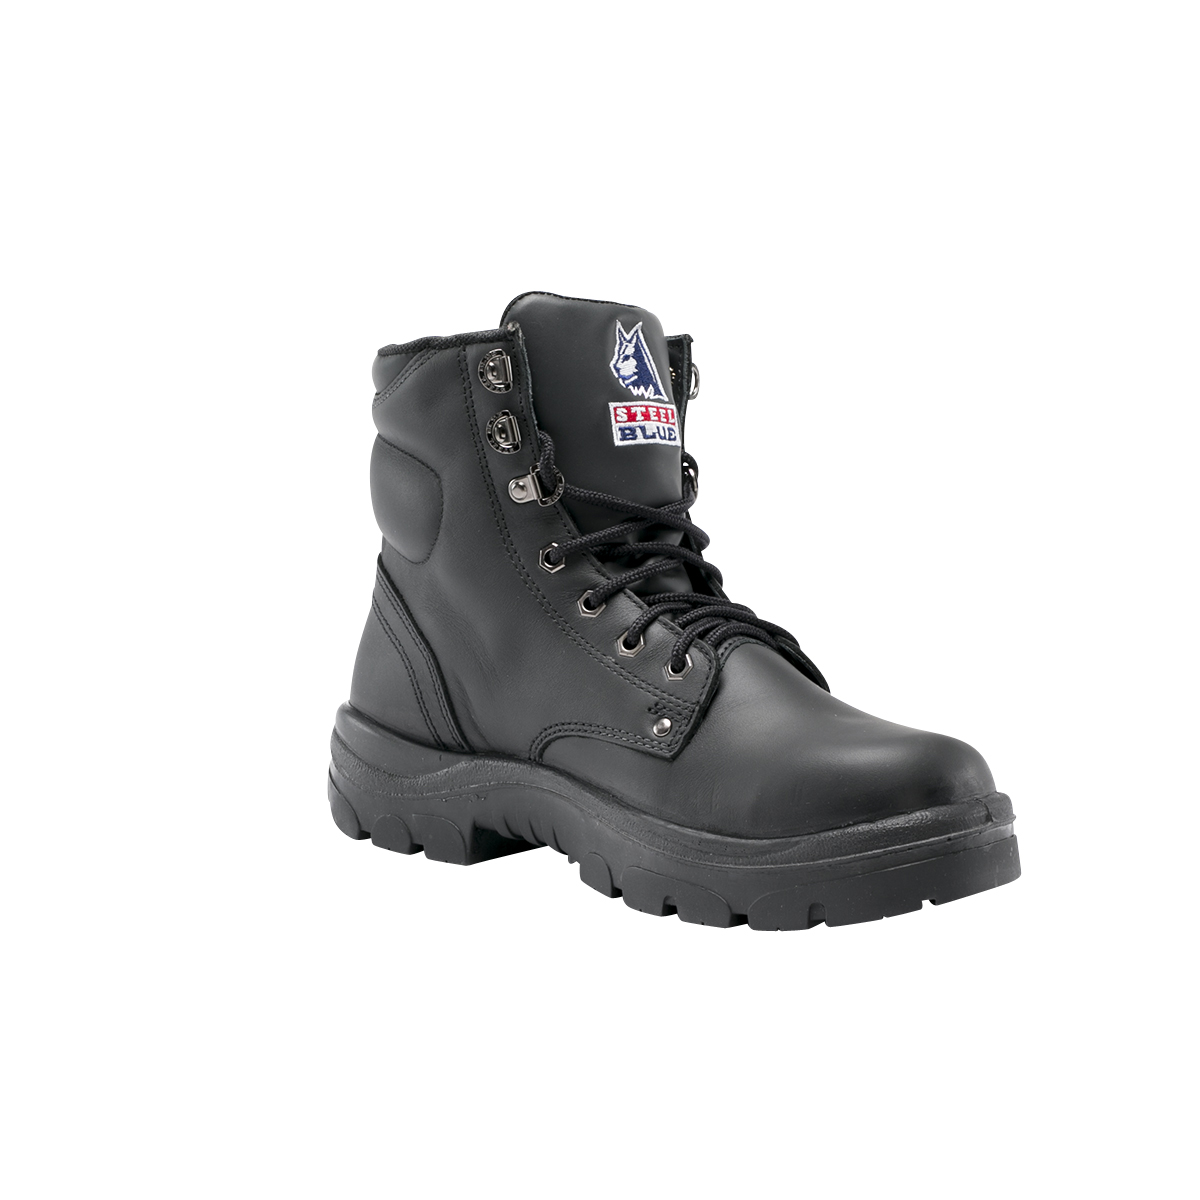 SAFETY BOOT ARGYLE BLACK S10 -ANKLE LACE UP